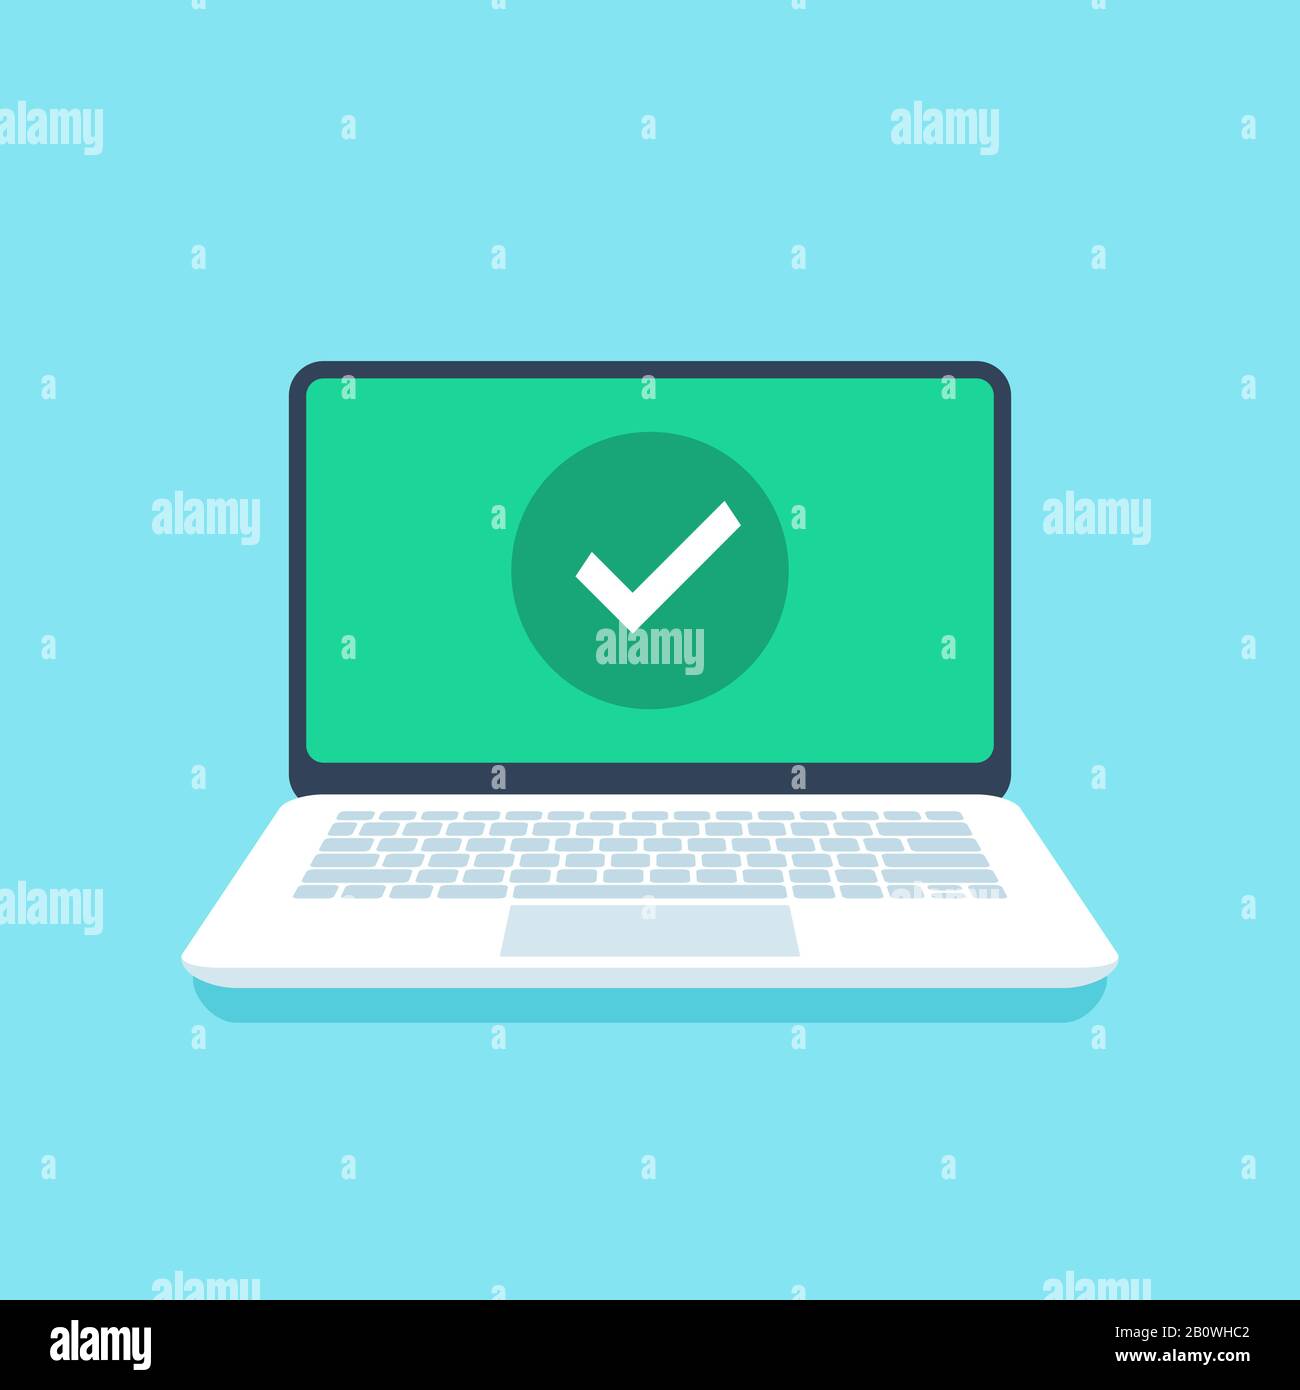 Check mark on laptop screen. Success tick icon or confirmation notification on open laptop display flat vector illustration Stock Vector